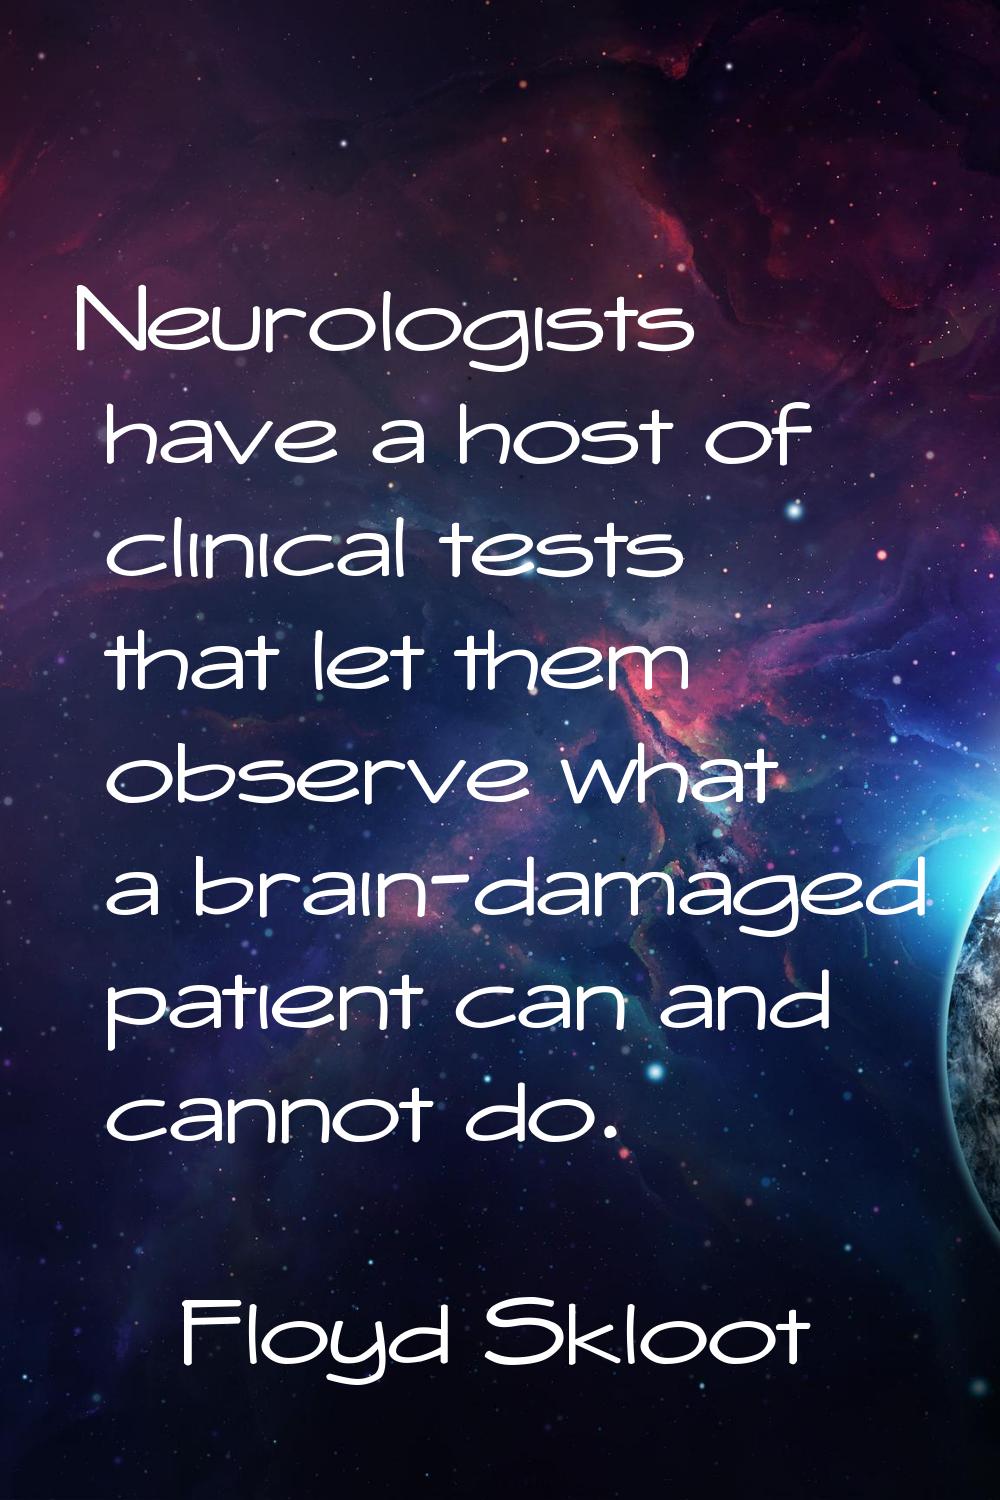 Neurologists have a host of clinical tests that let them observe what a brain-damaged patient can a